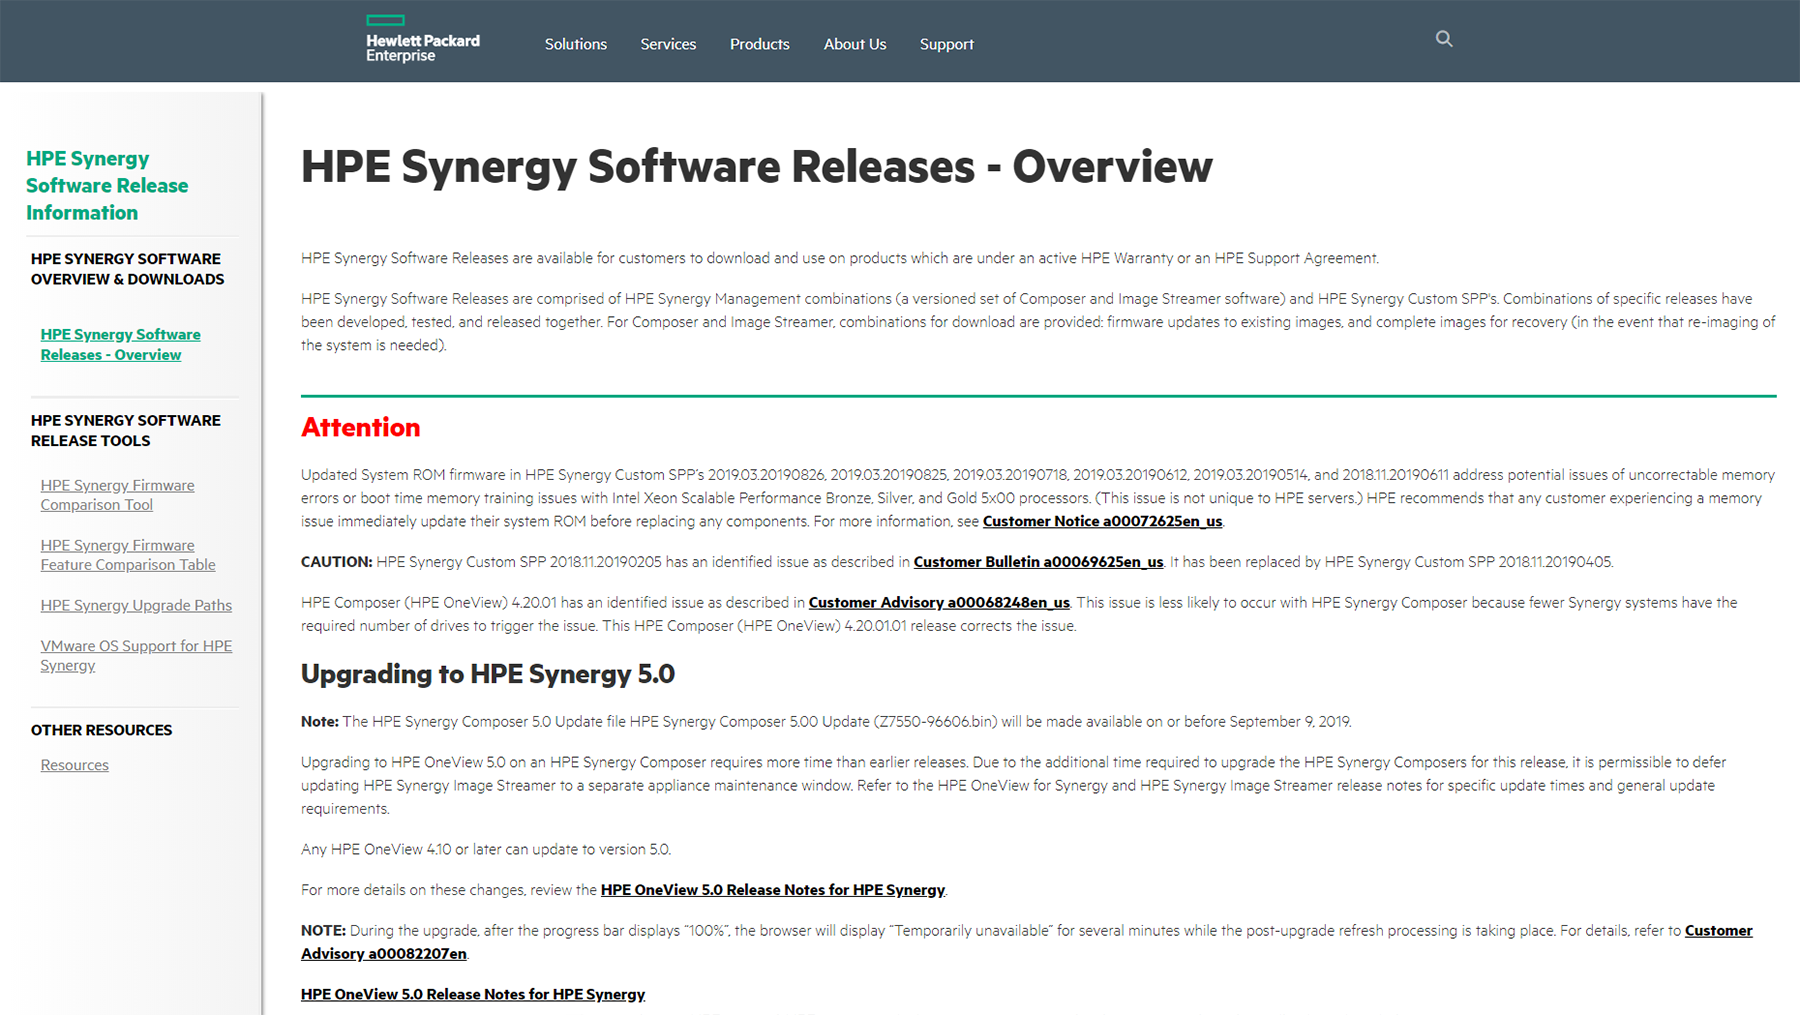 HPE Synergy Software Release Information